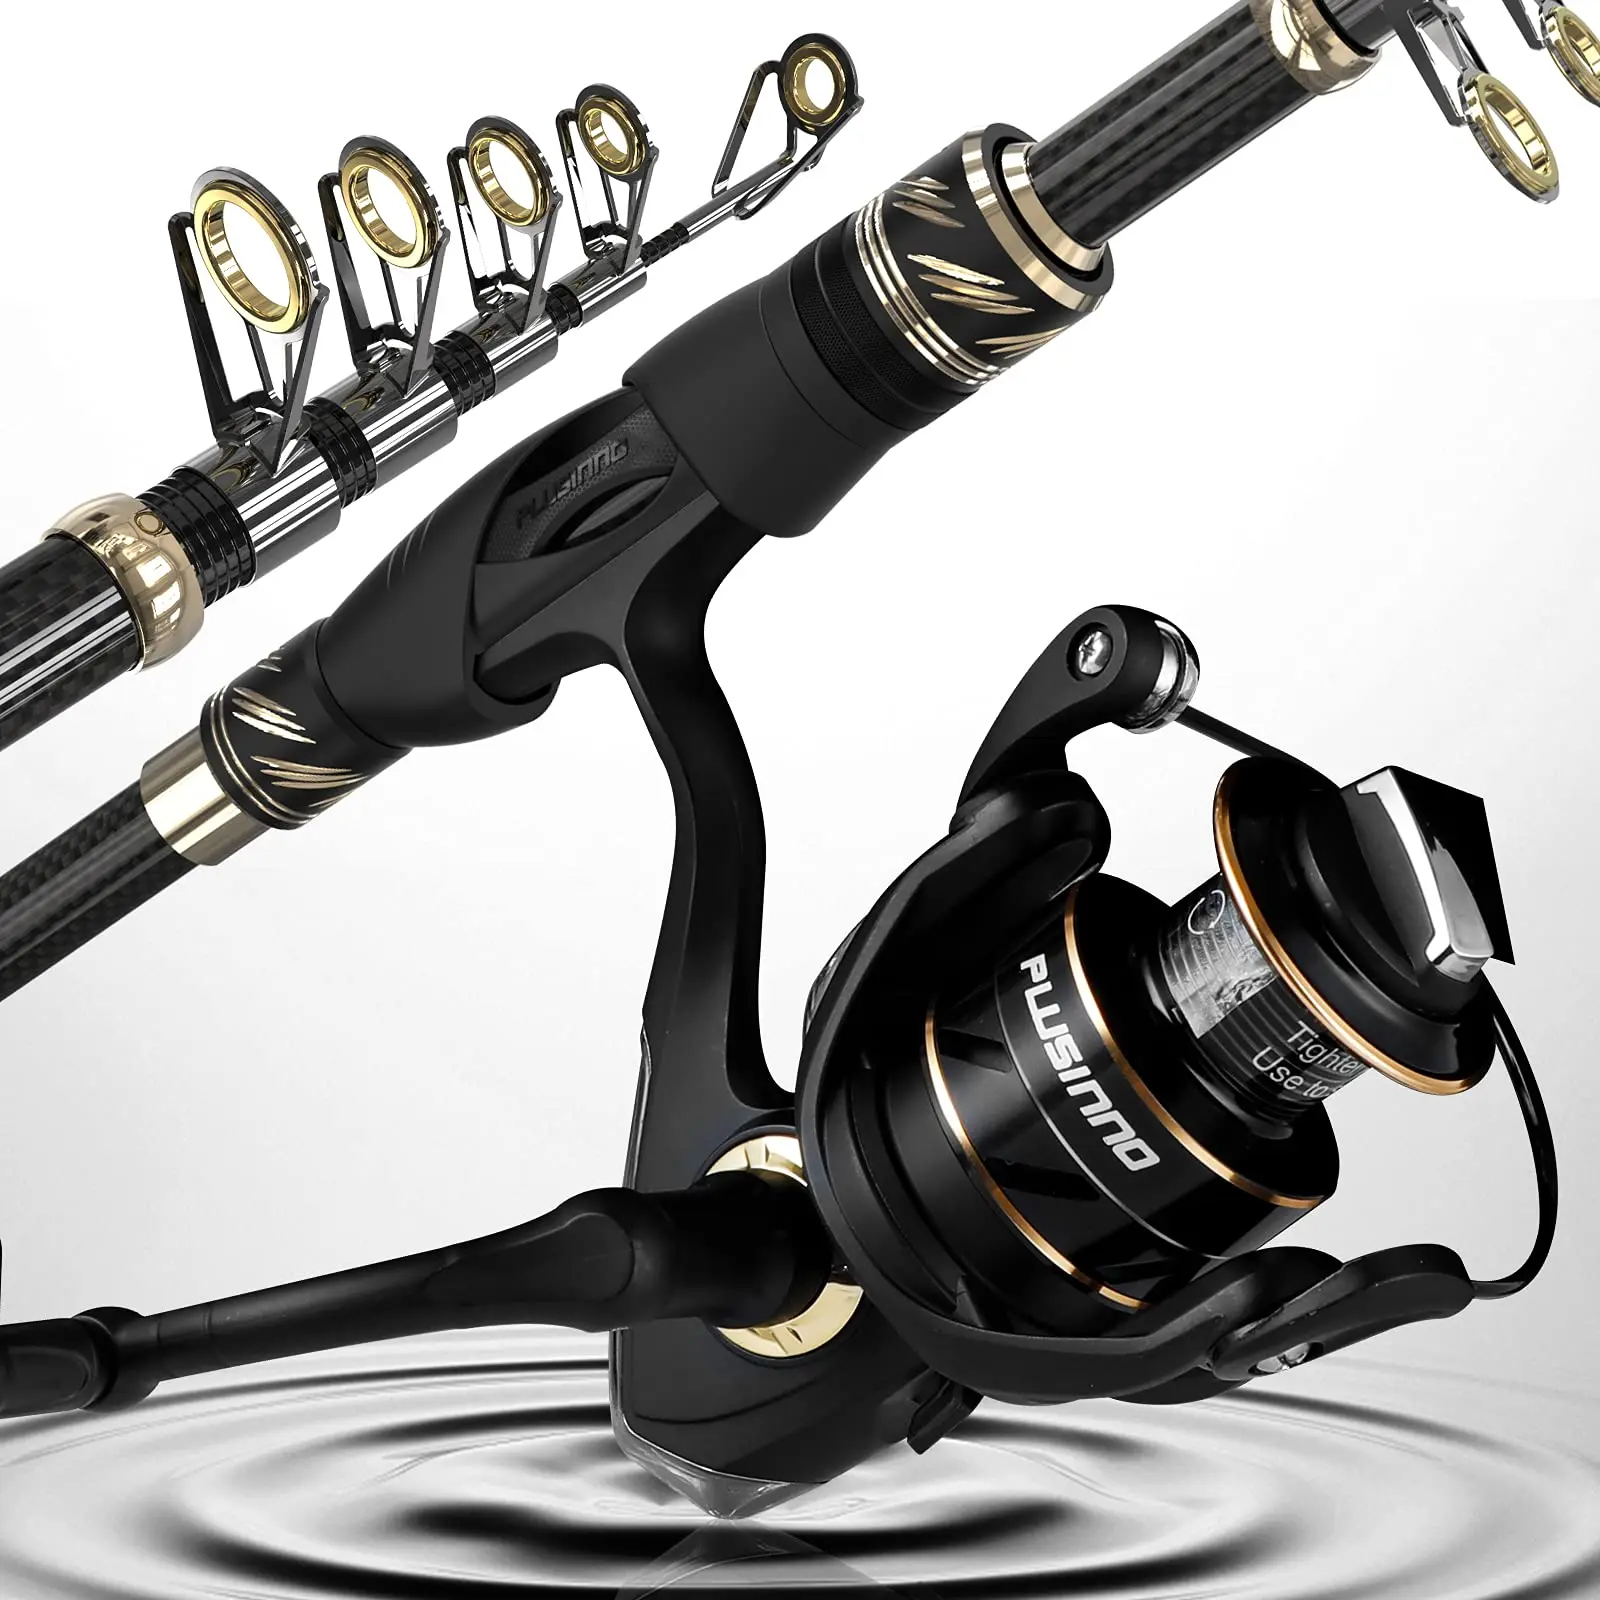  moisture Reel and Fishing Rod Combo Ultralight Carbon